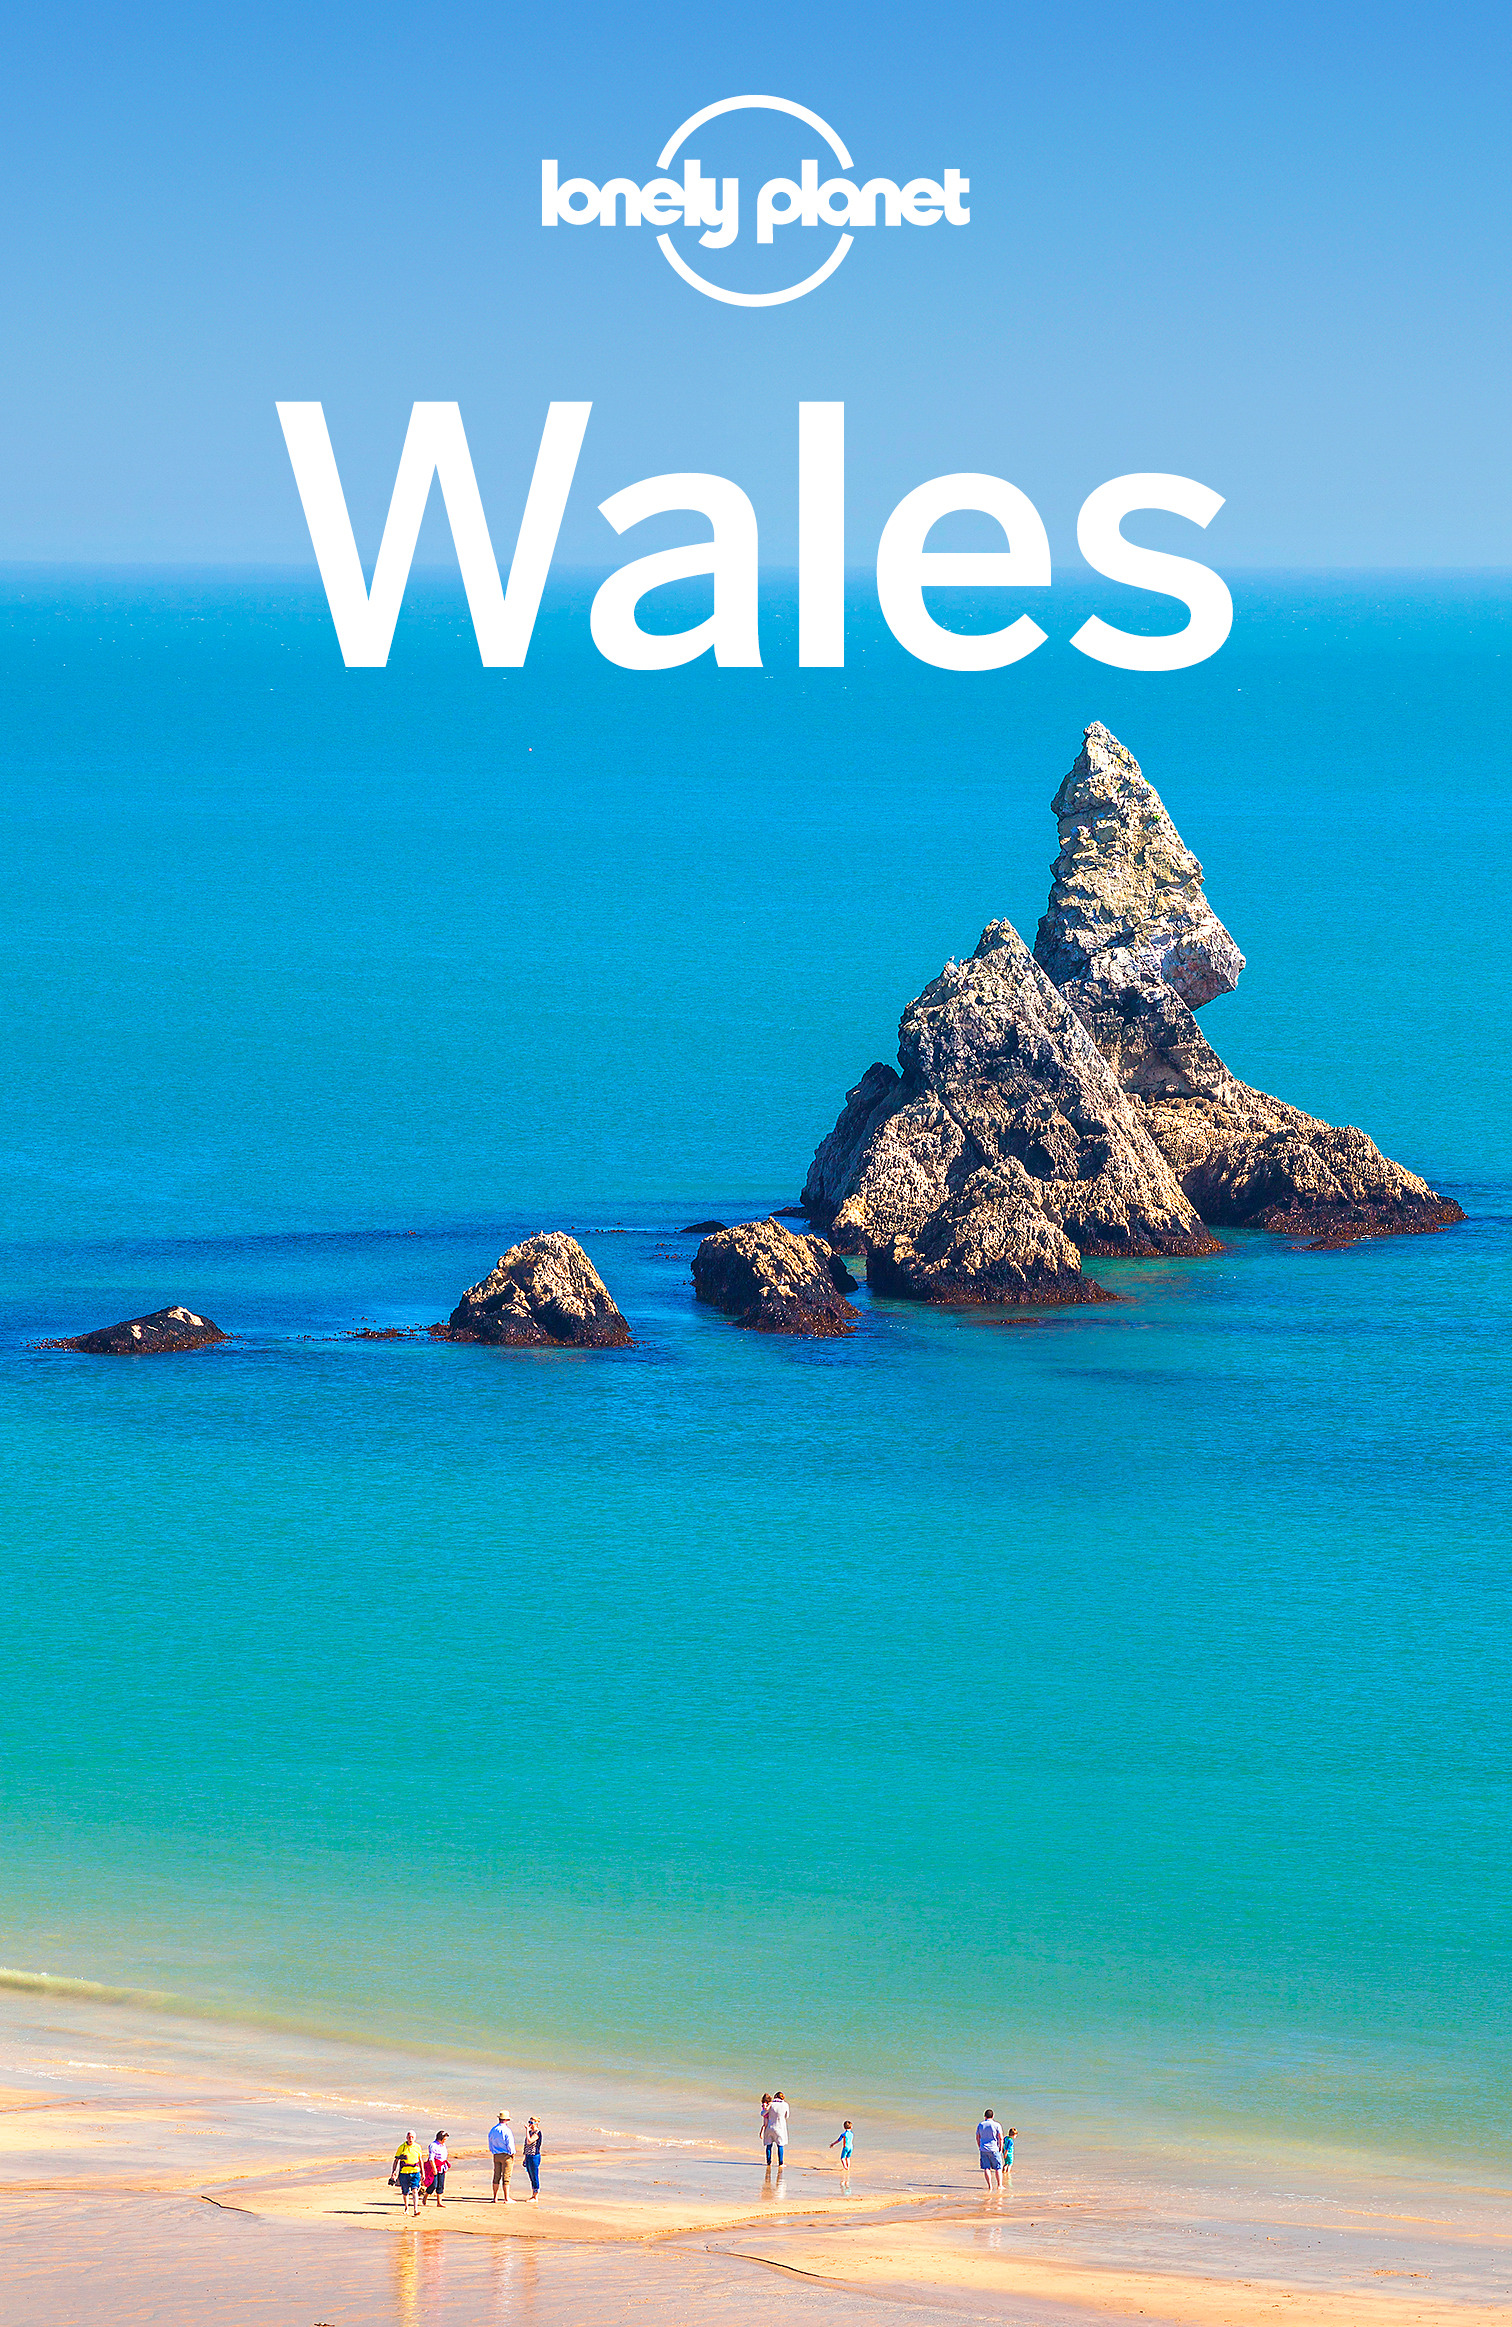 Dragicevich, Peter - Lonely Planet Wales, ebook